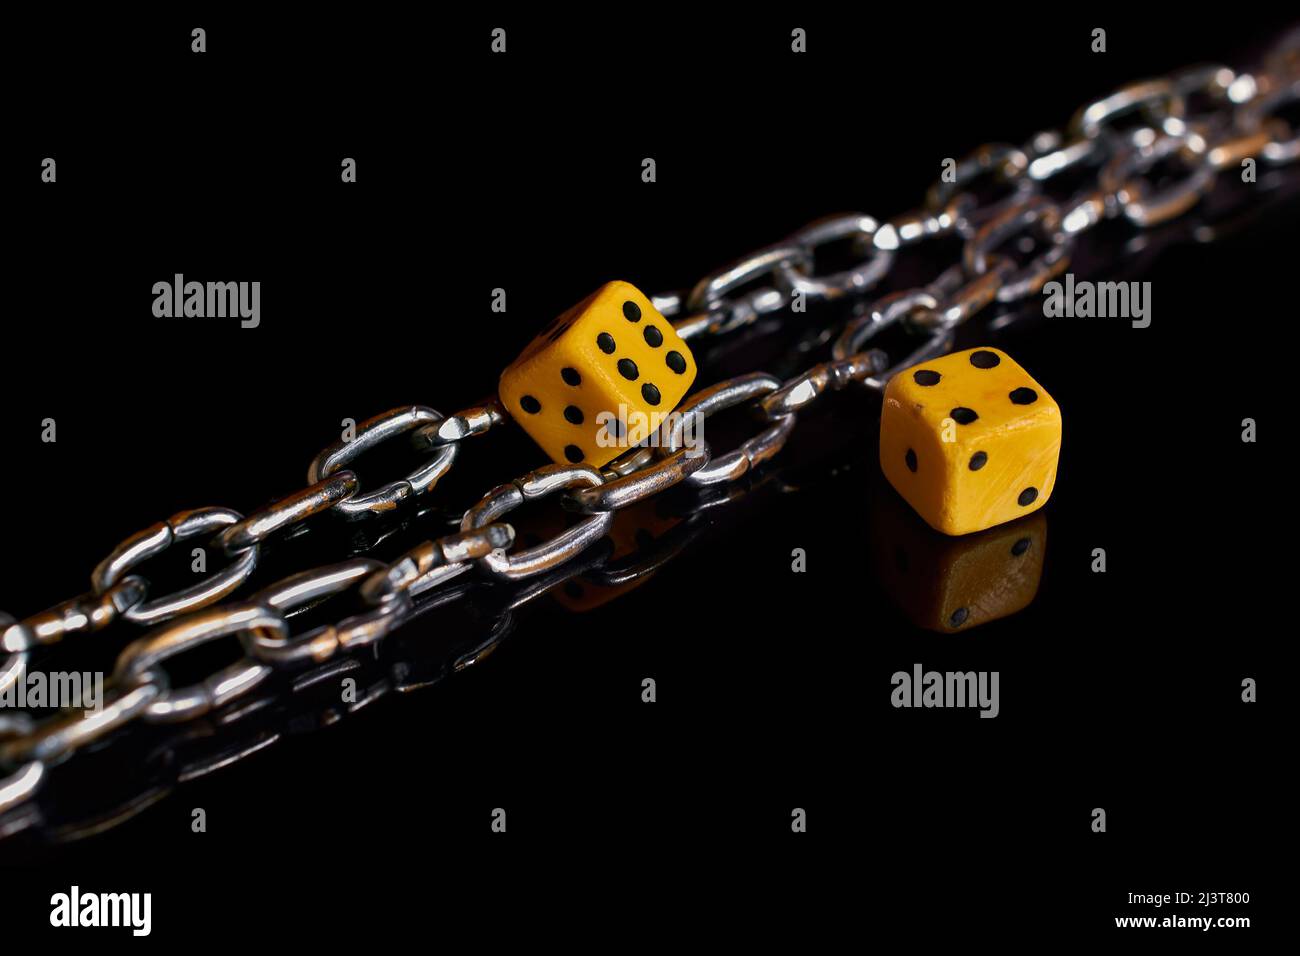 Gambling addiction. Two dice and a chain on a black background with reflection Stock Photo